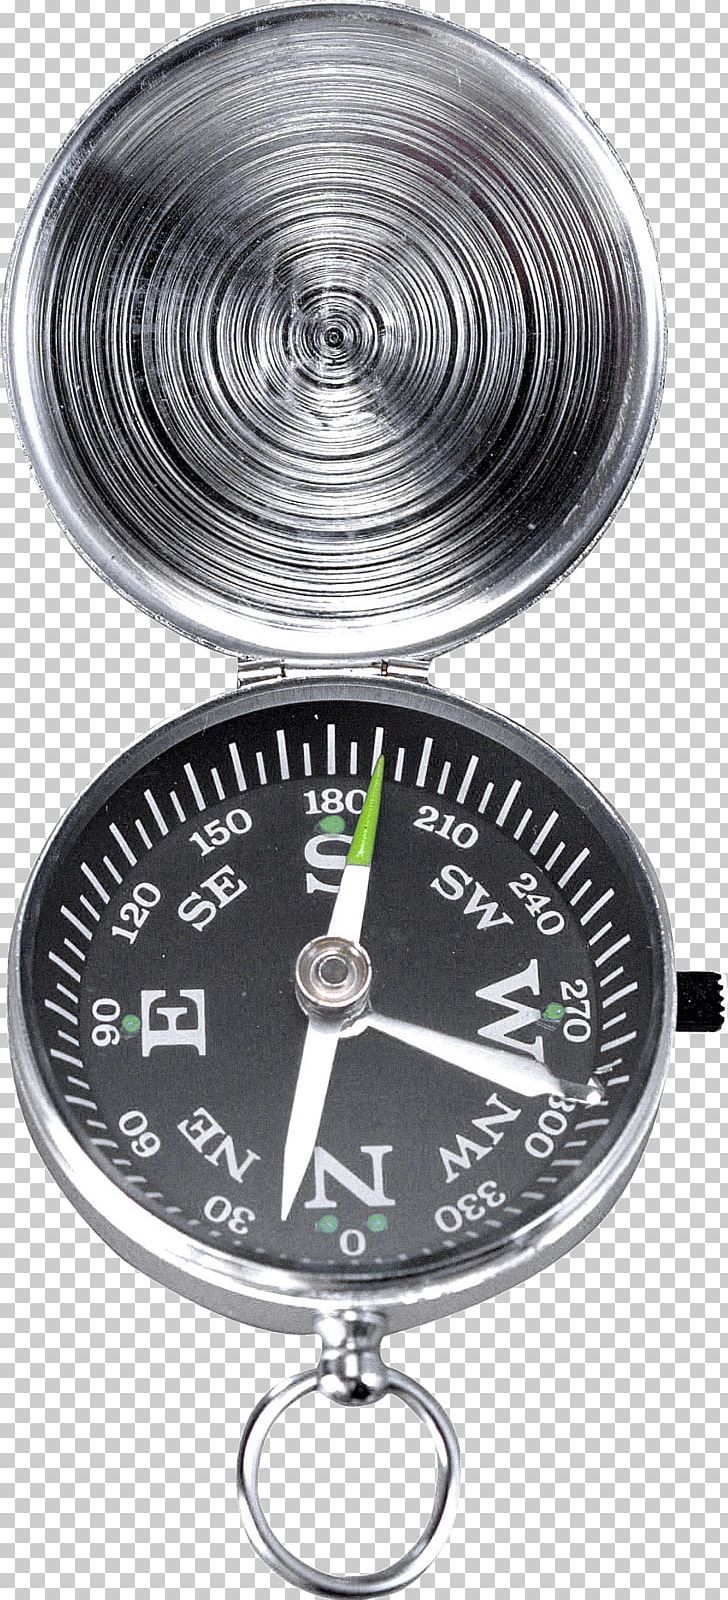 Compass PNG, Clipart, Compass Free PNG Download